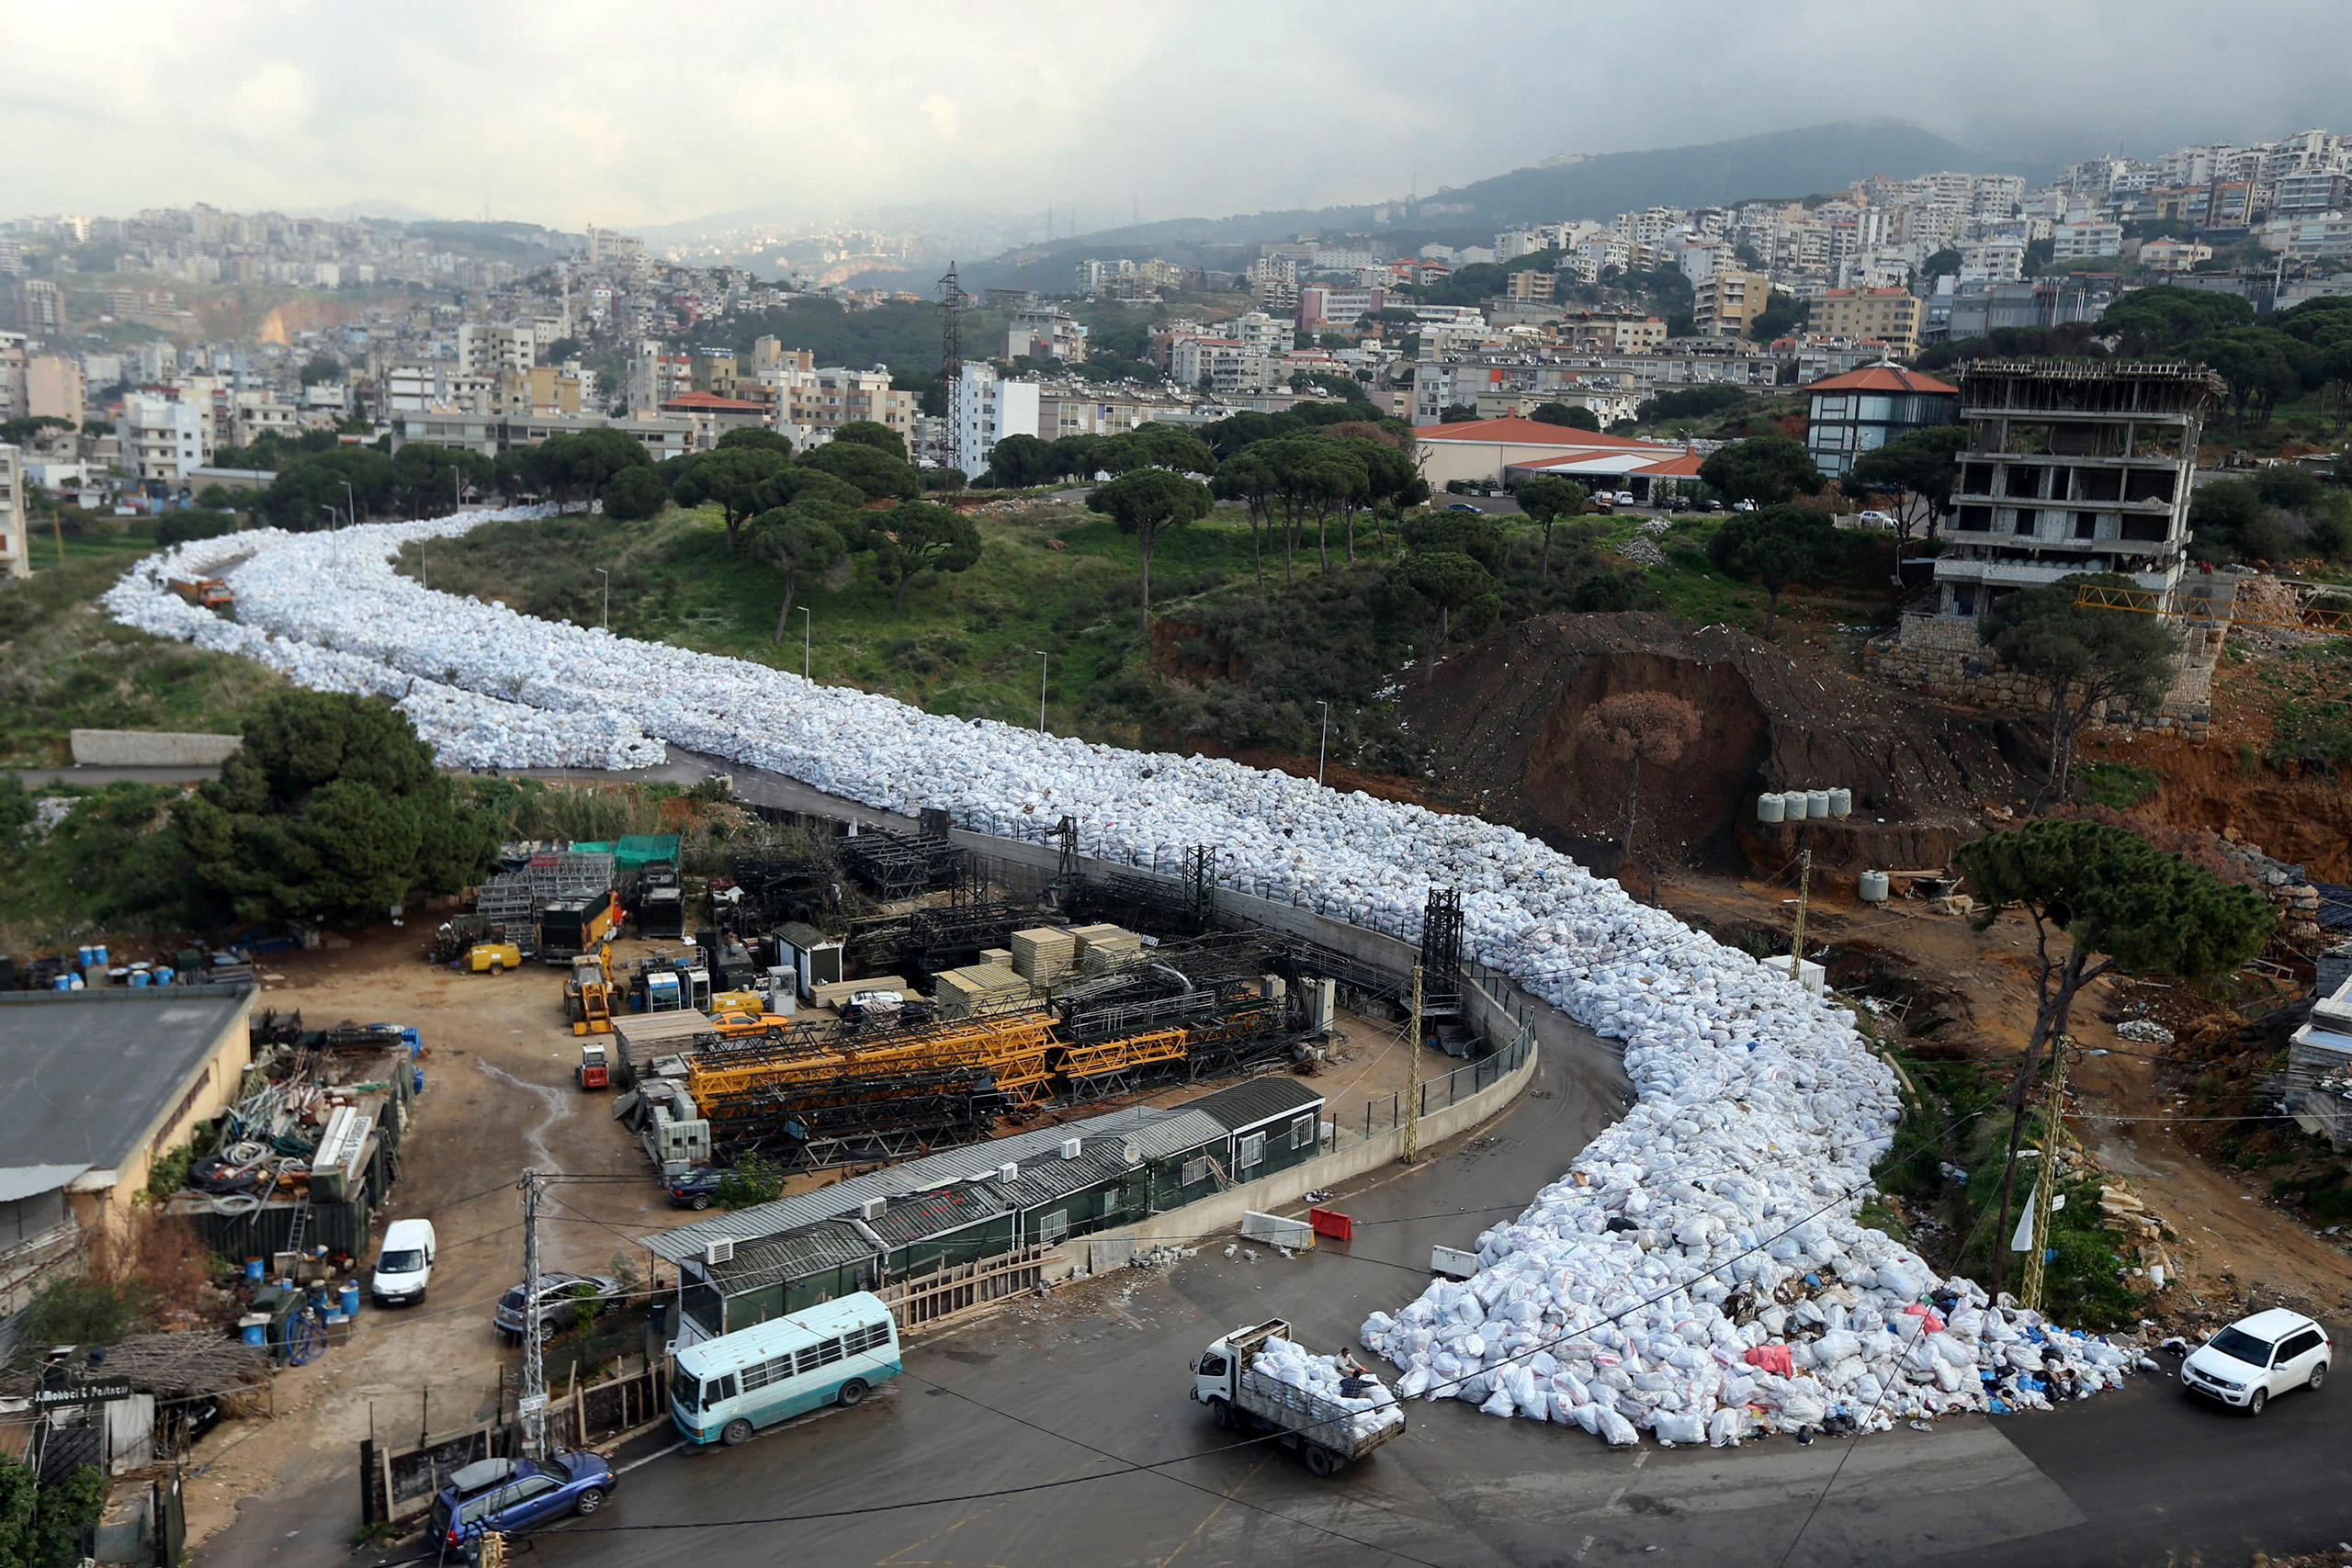 Thousands of packed garbage bags in Jdeideh, a northern suburb of Beirut, Lebanon, Feb. 23, 2016. The country has struggled to resolve its trash crisis since last summer. (Hasan Shaaban—Reuters)